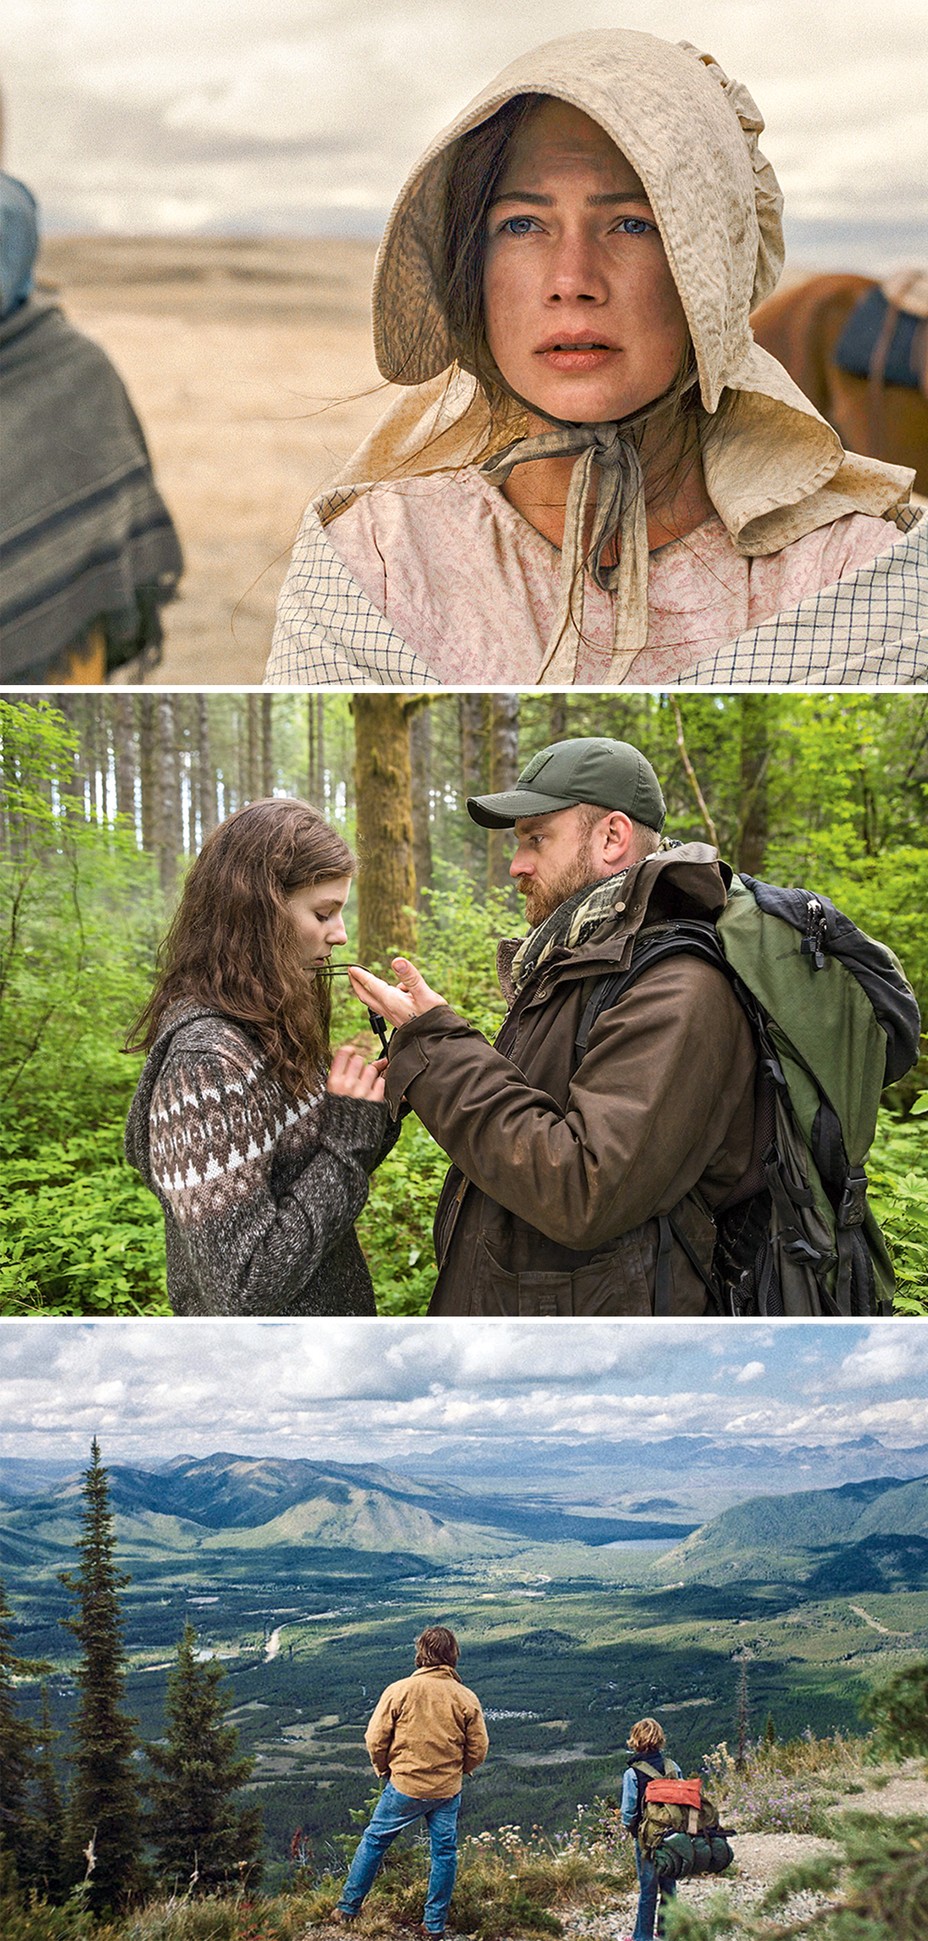 3 movie stills: a woman in a bonnet, a man and a woman conversing in the middle of a forest, and a man and boy looking out over a mountainous landscape